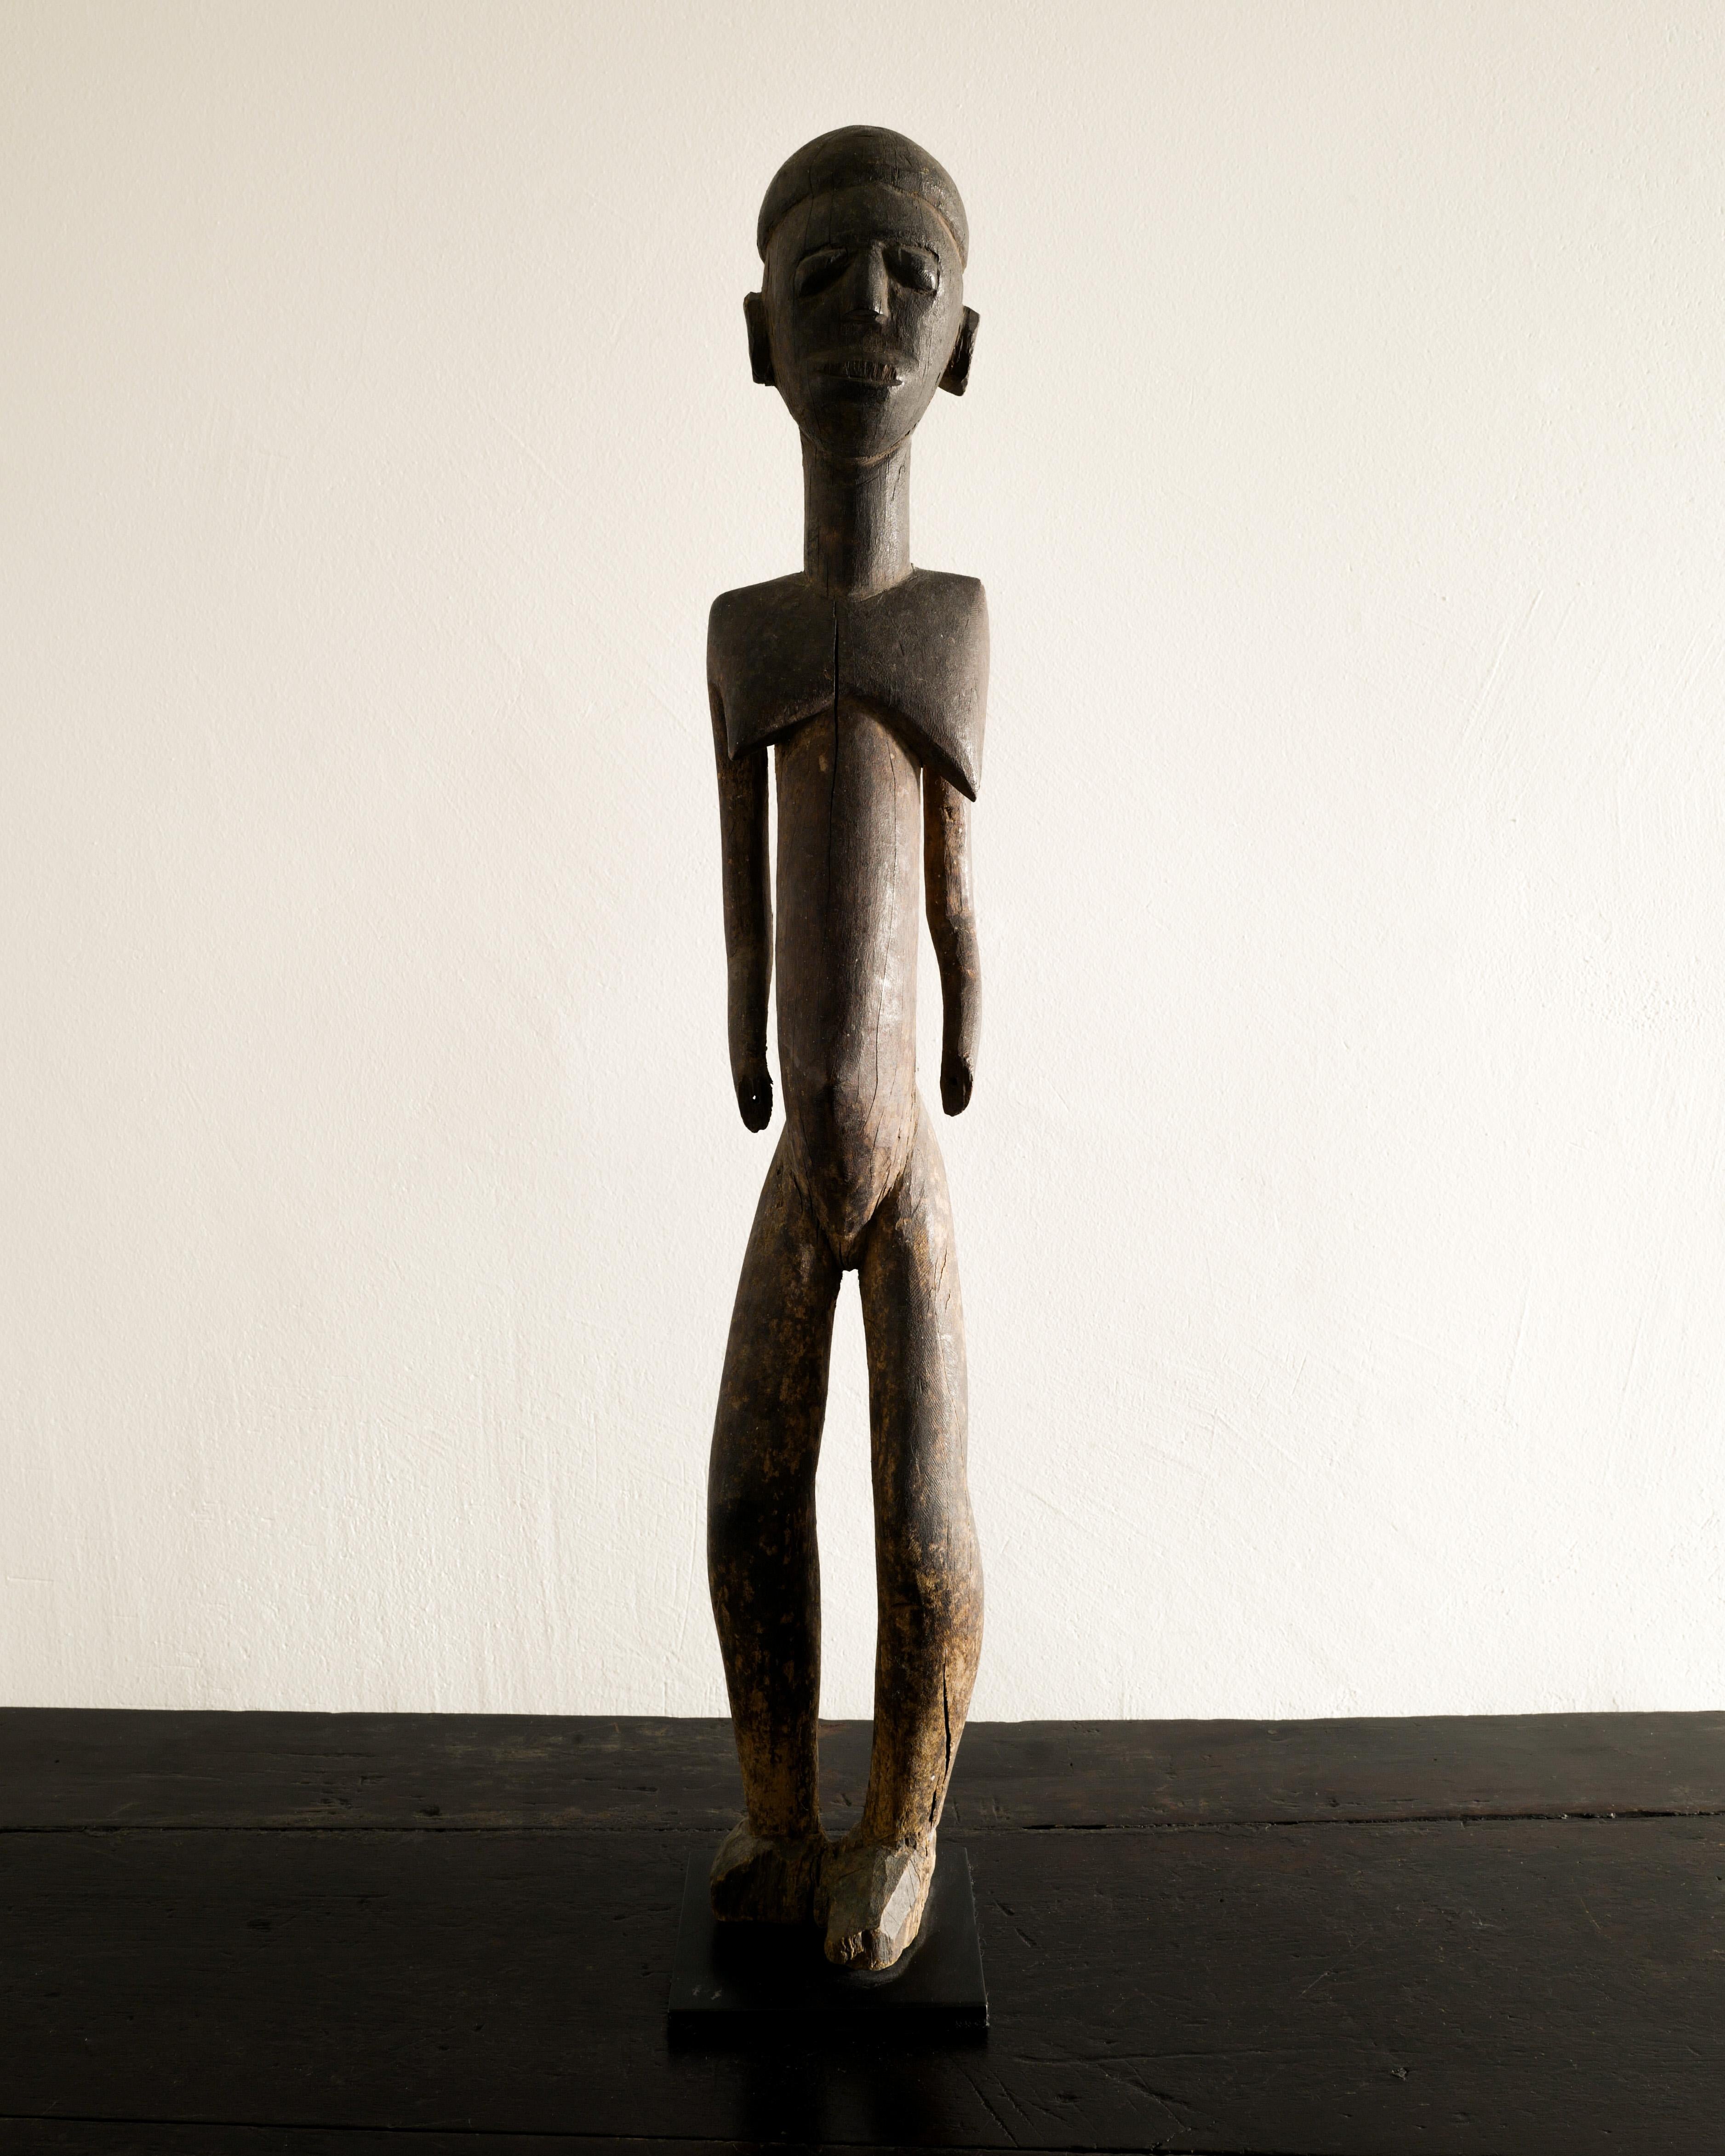 Rare mid century Lobi folk tribal art female figure wooden sculpture produced in Burkina Faso, Africa by anonymous designer in the 1940s. In good original condition. 

Dimensions: H: 72 cm / 28.35